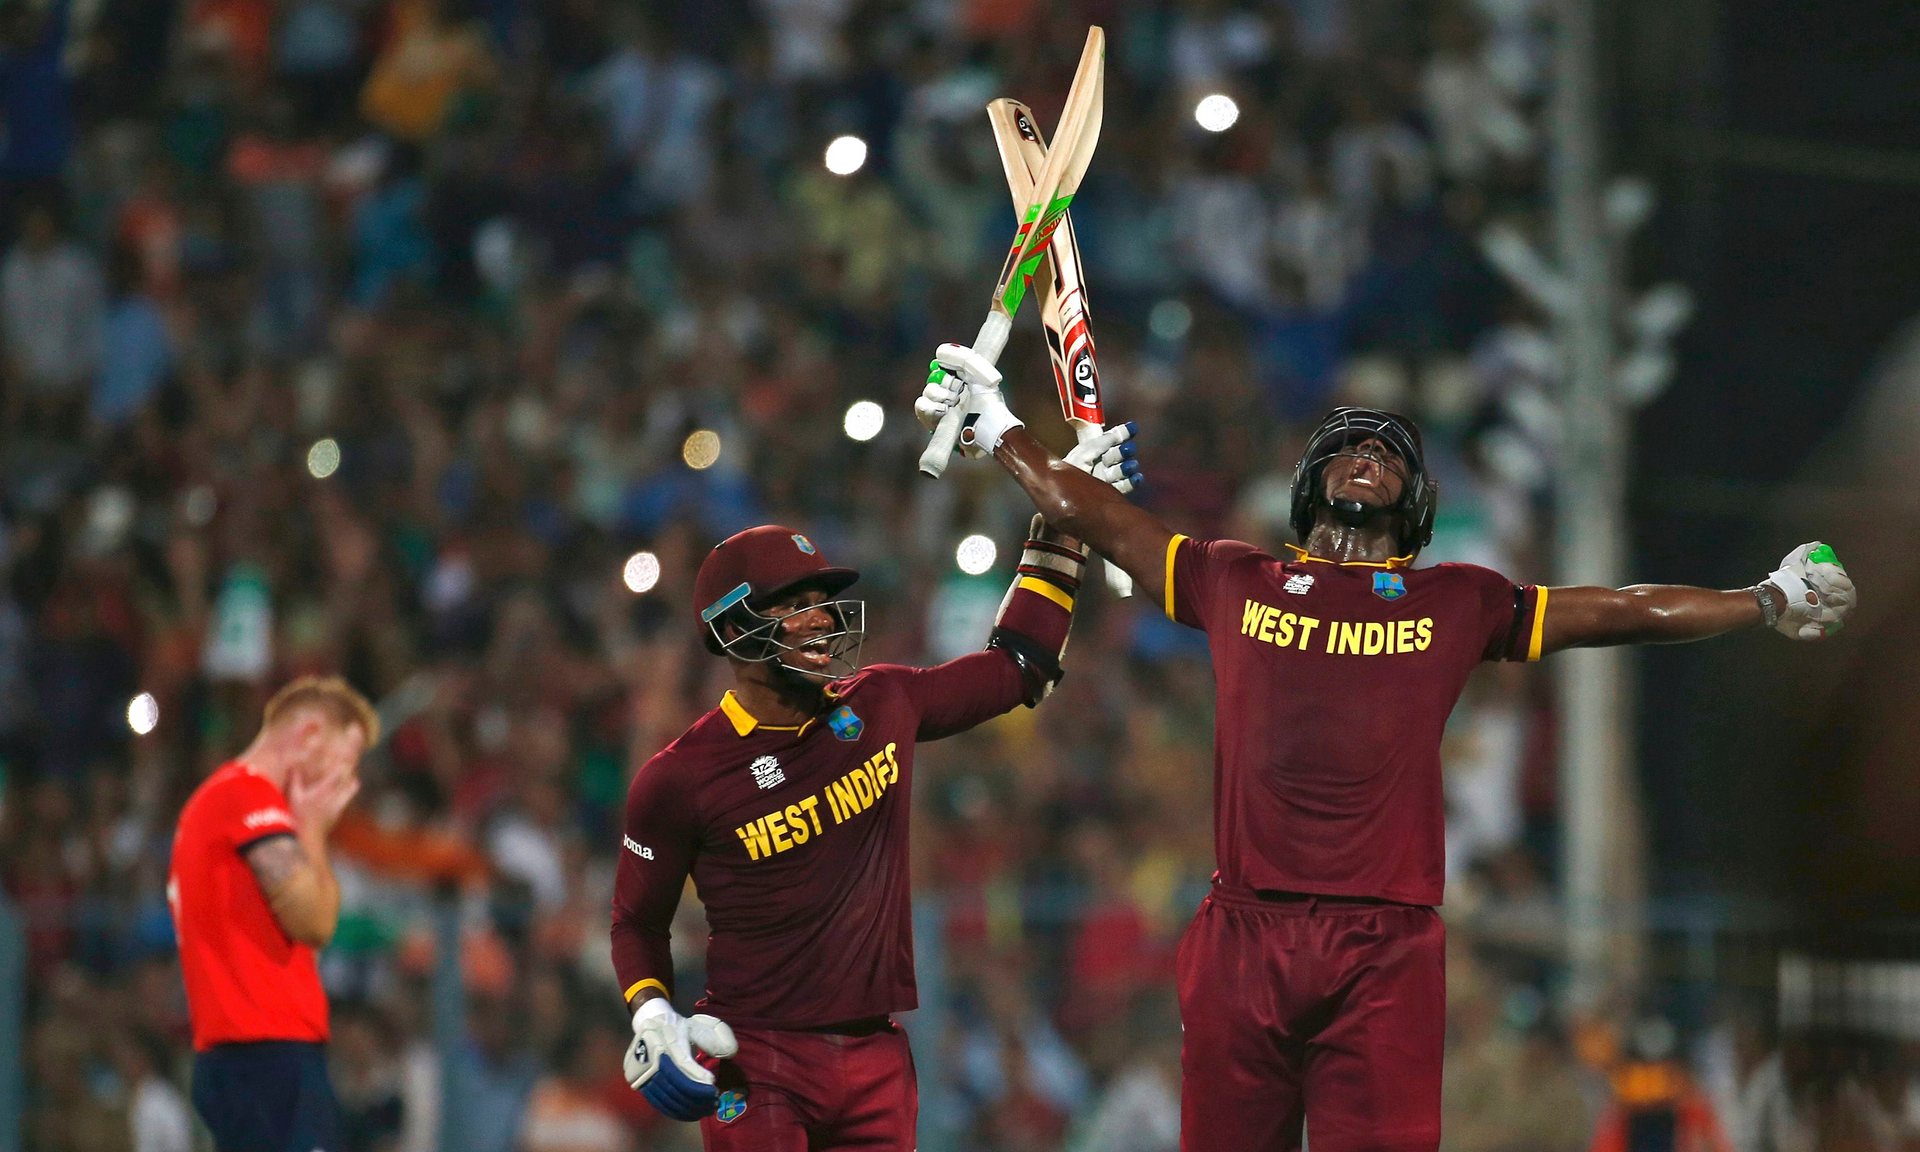 carlos brathwaite clubbed four successive sixes off ben stokes to help win last year s world t20 photo reuters